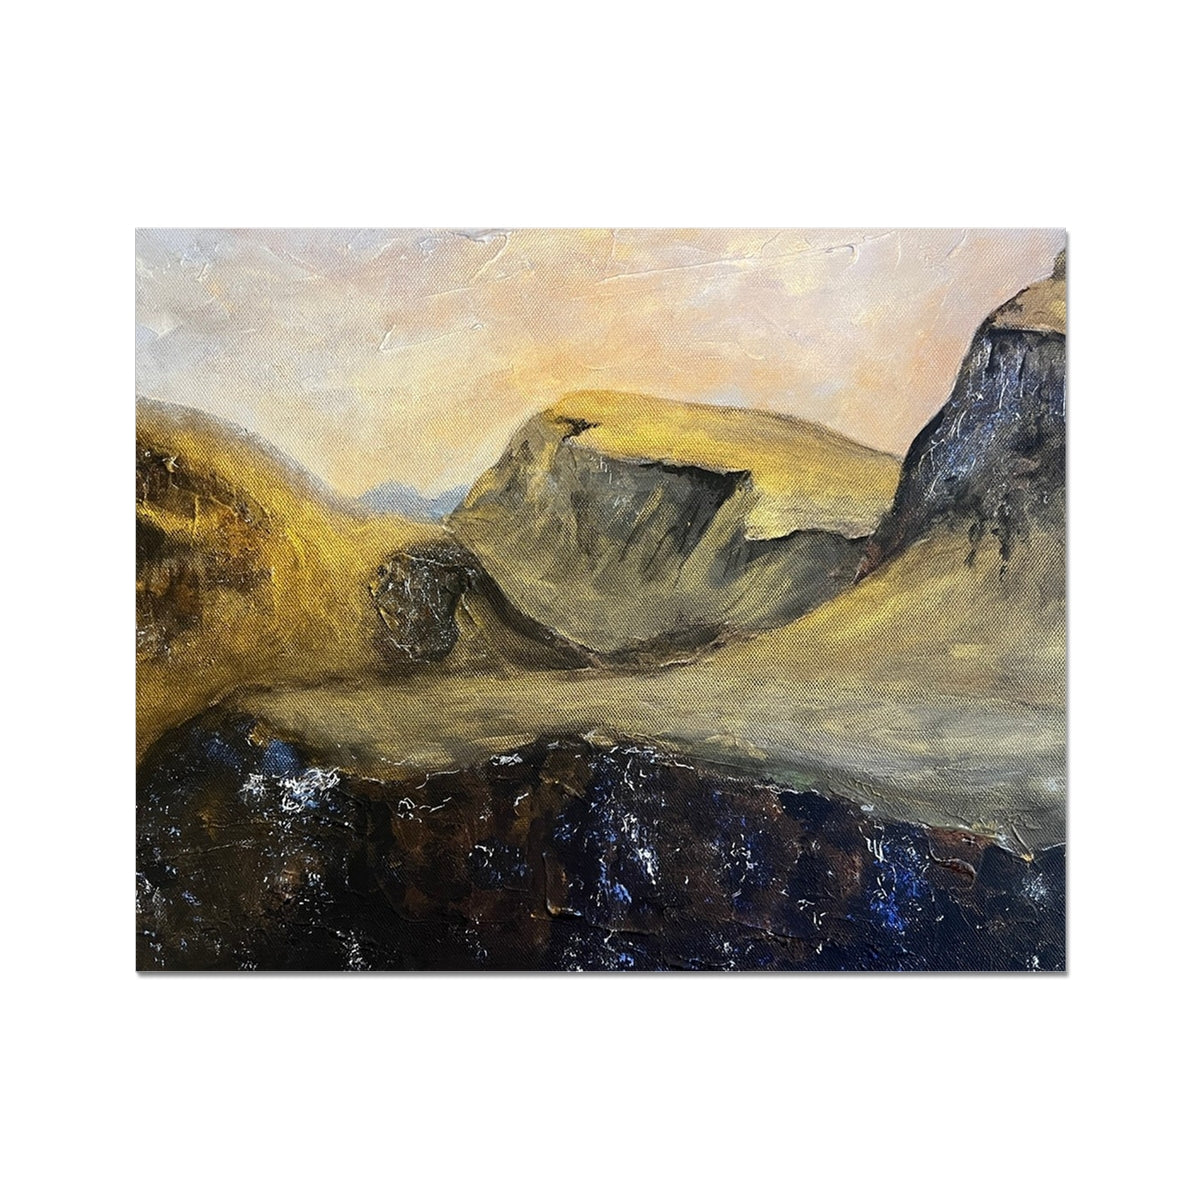 The Quiraing Skye Painting | Hahnemühle German Etching Prints From Scotland-Fine art-Skye Art Gallery-20"x16"-Paintings, Prints, Homeware, Art Gifts From Scotland By Scottish Artist Kevin Hunter